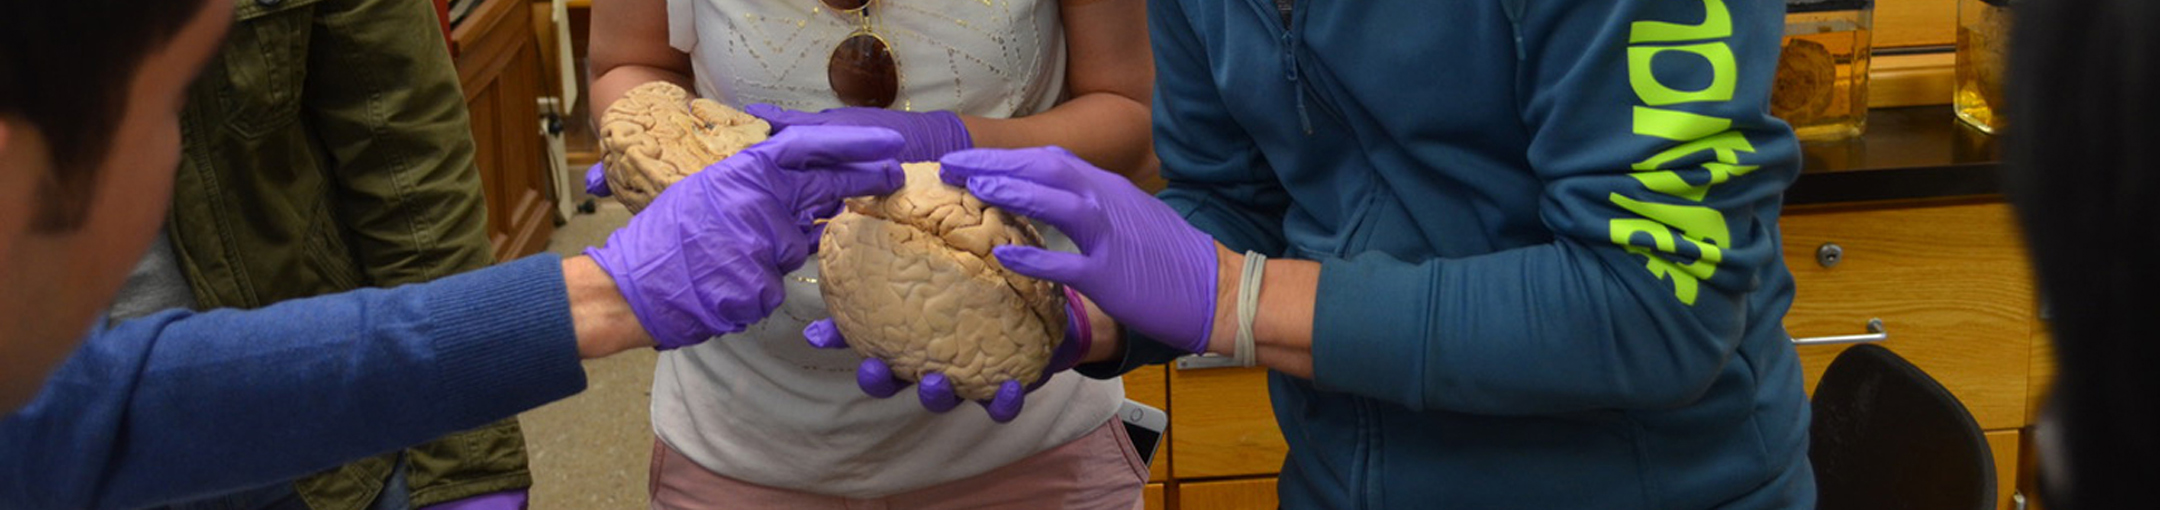 students examining a model of a brain